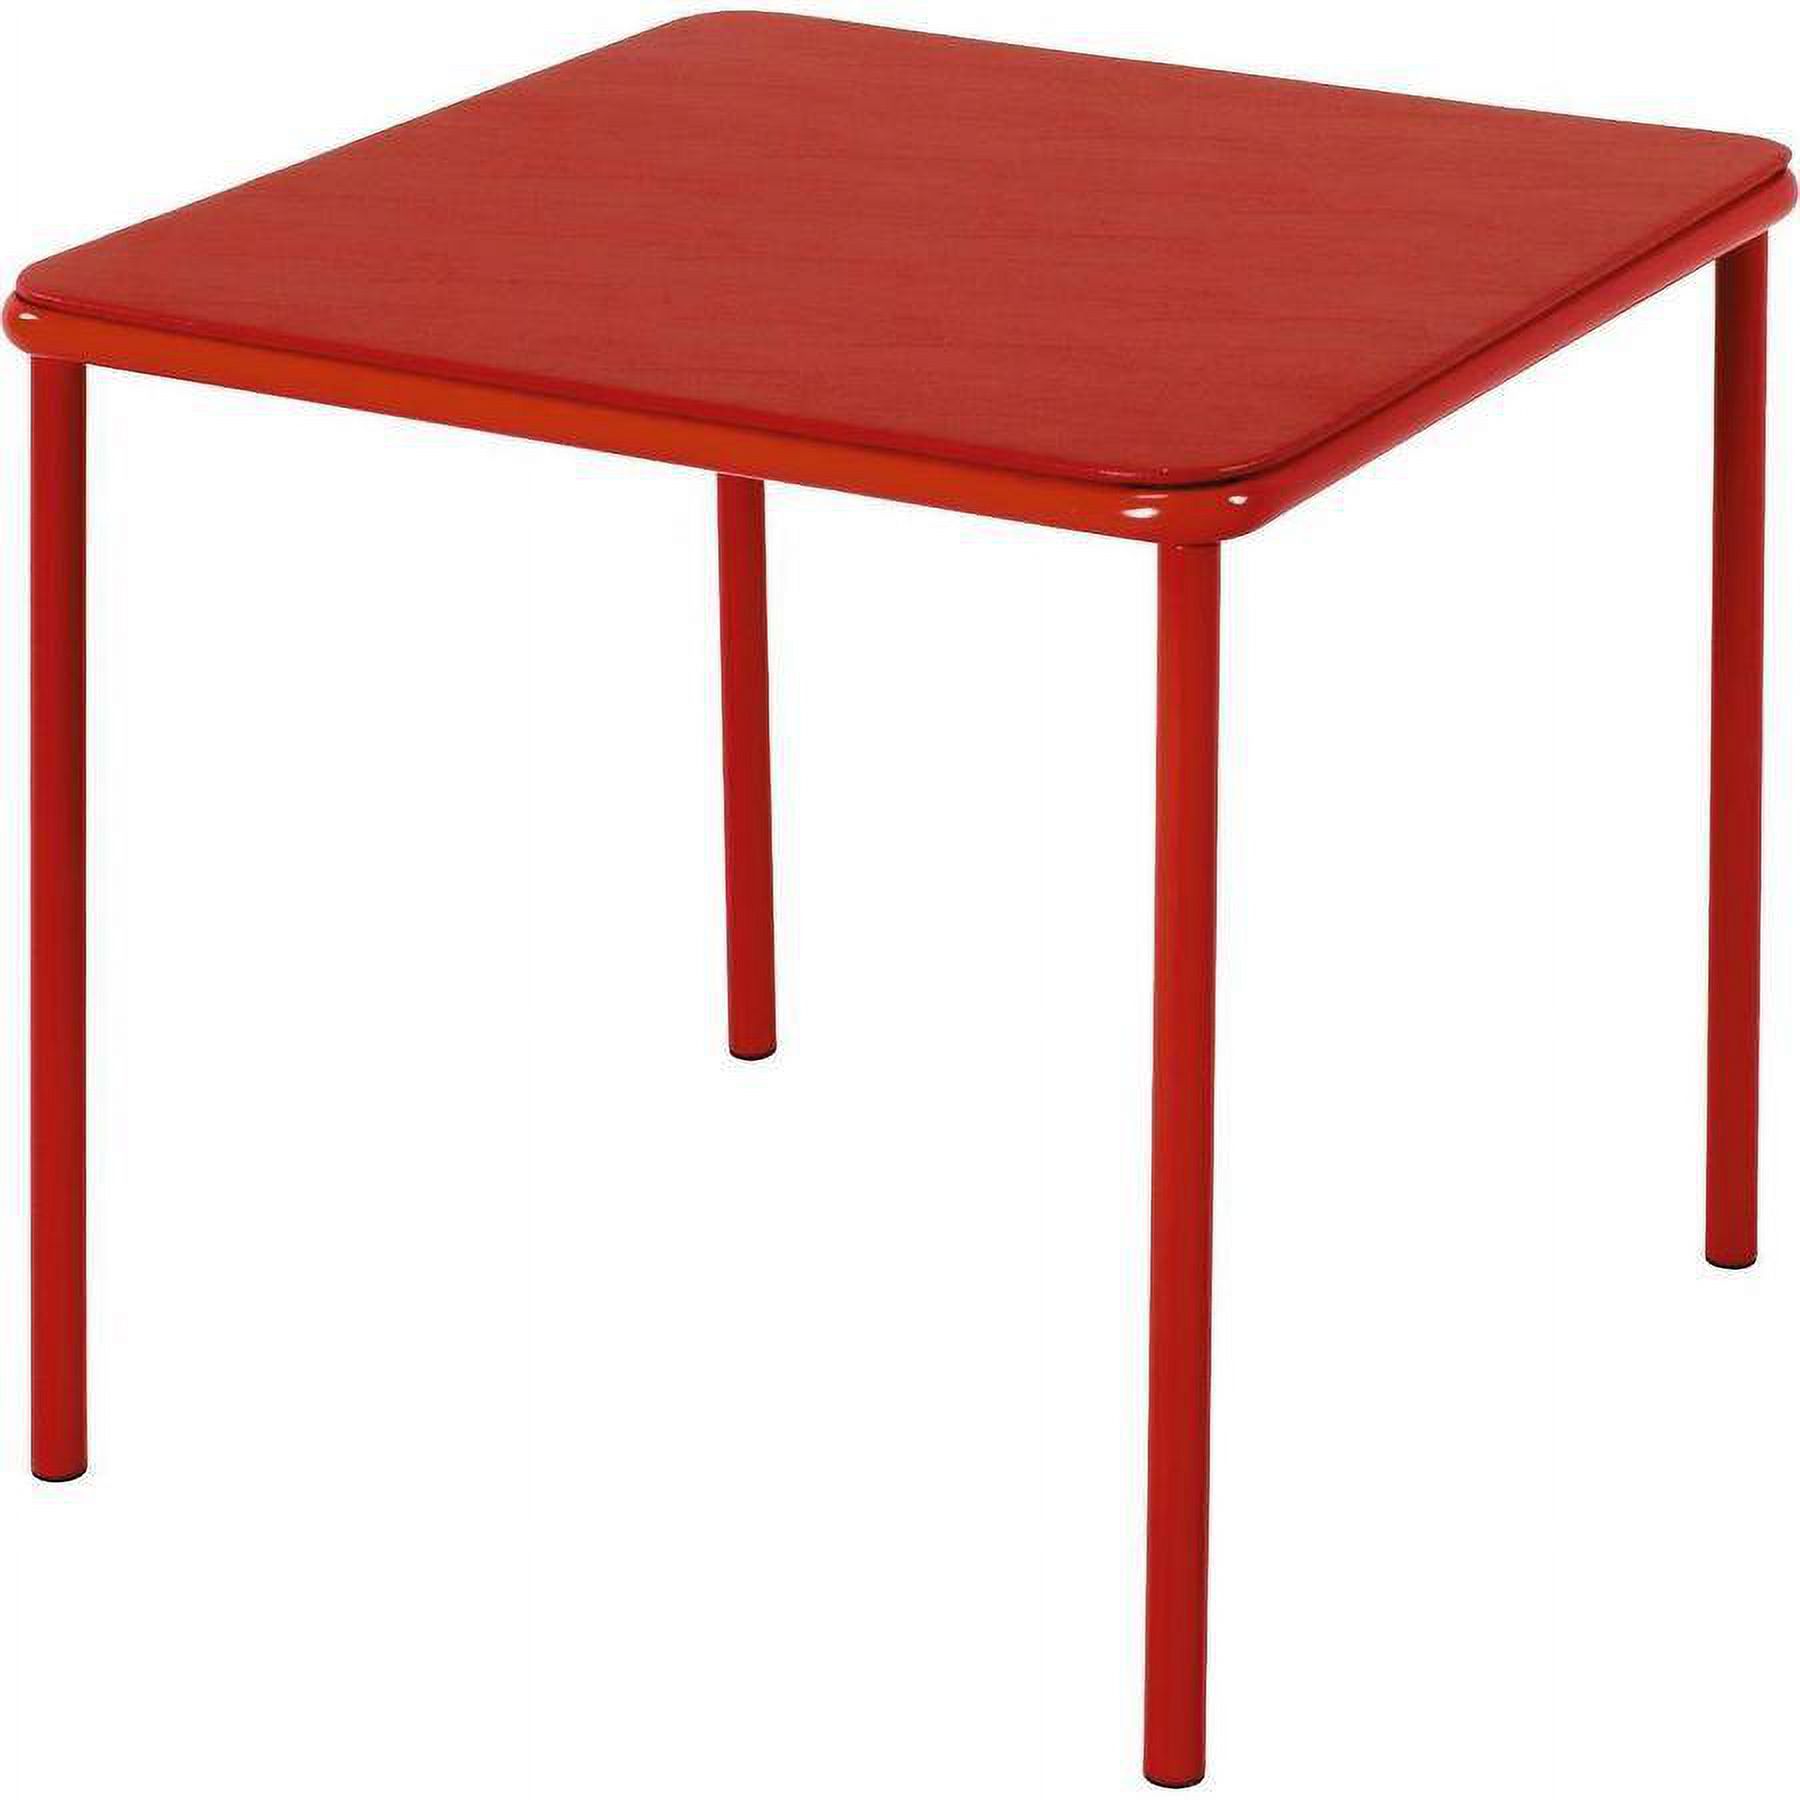 Safety 1st Children's Folding Table, Red - image 3 of 3